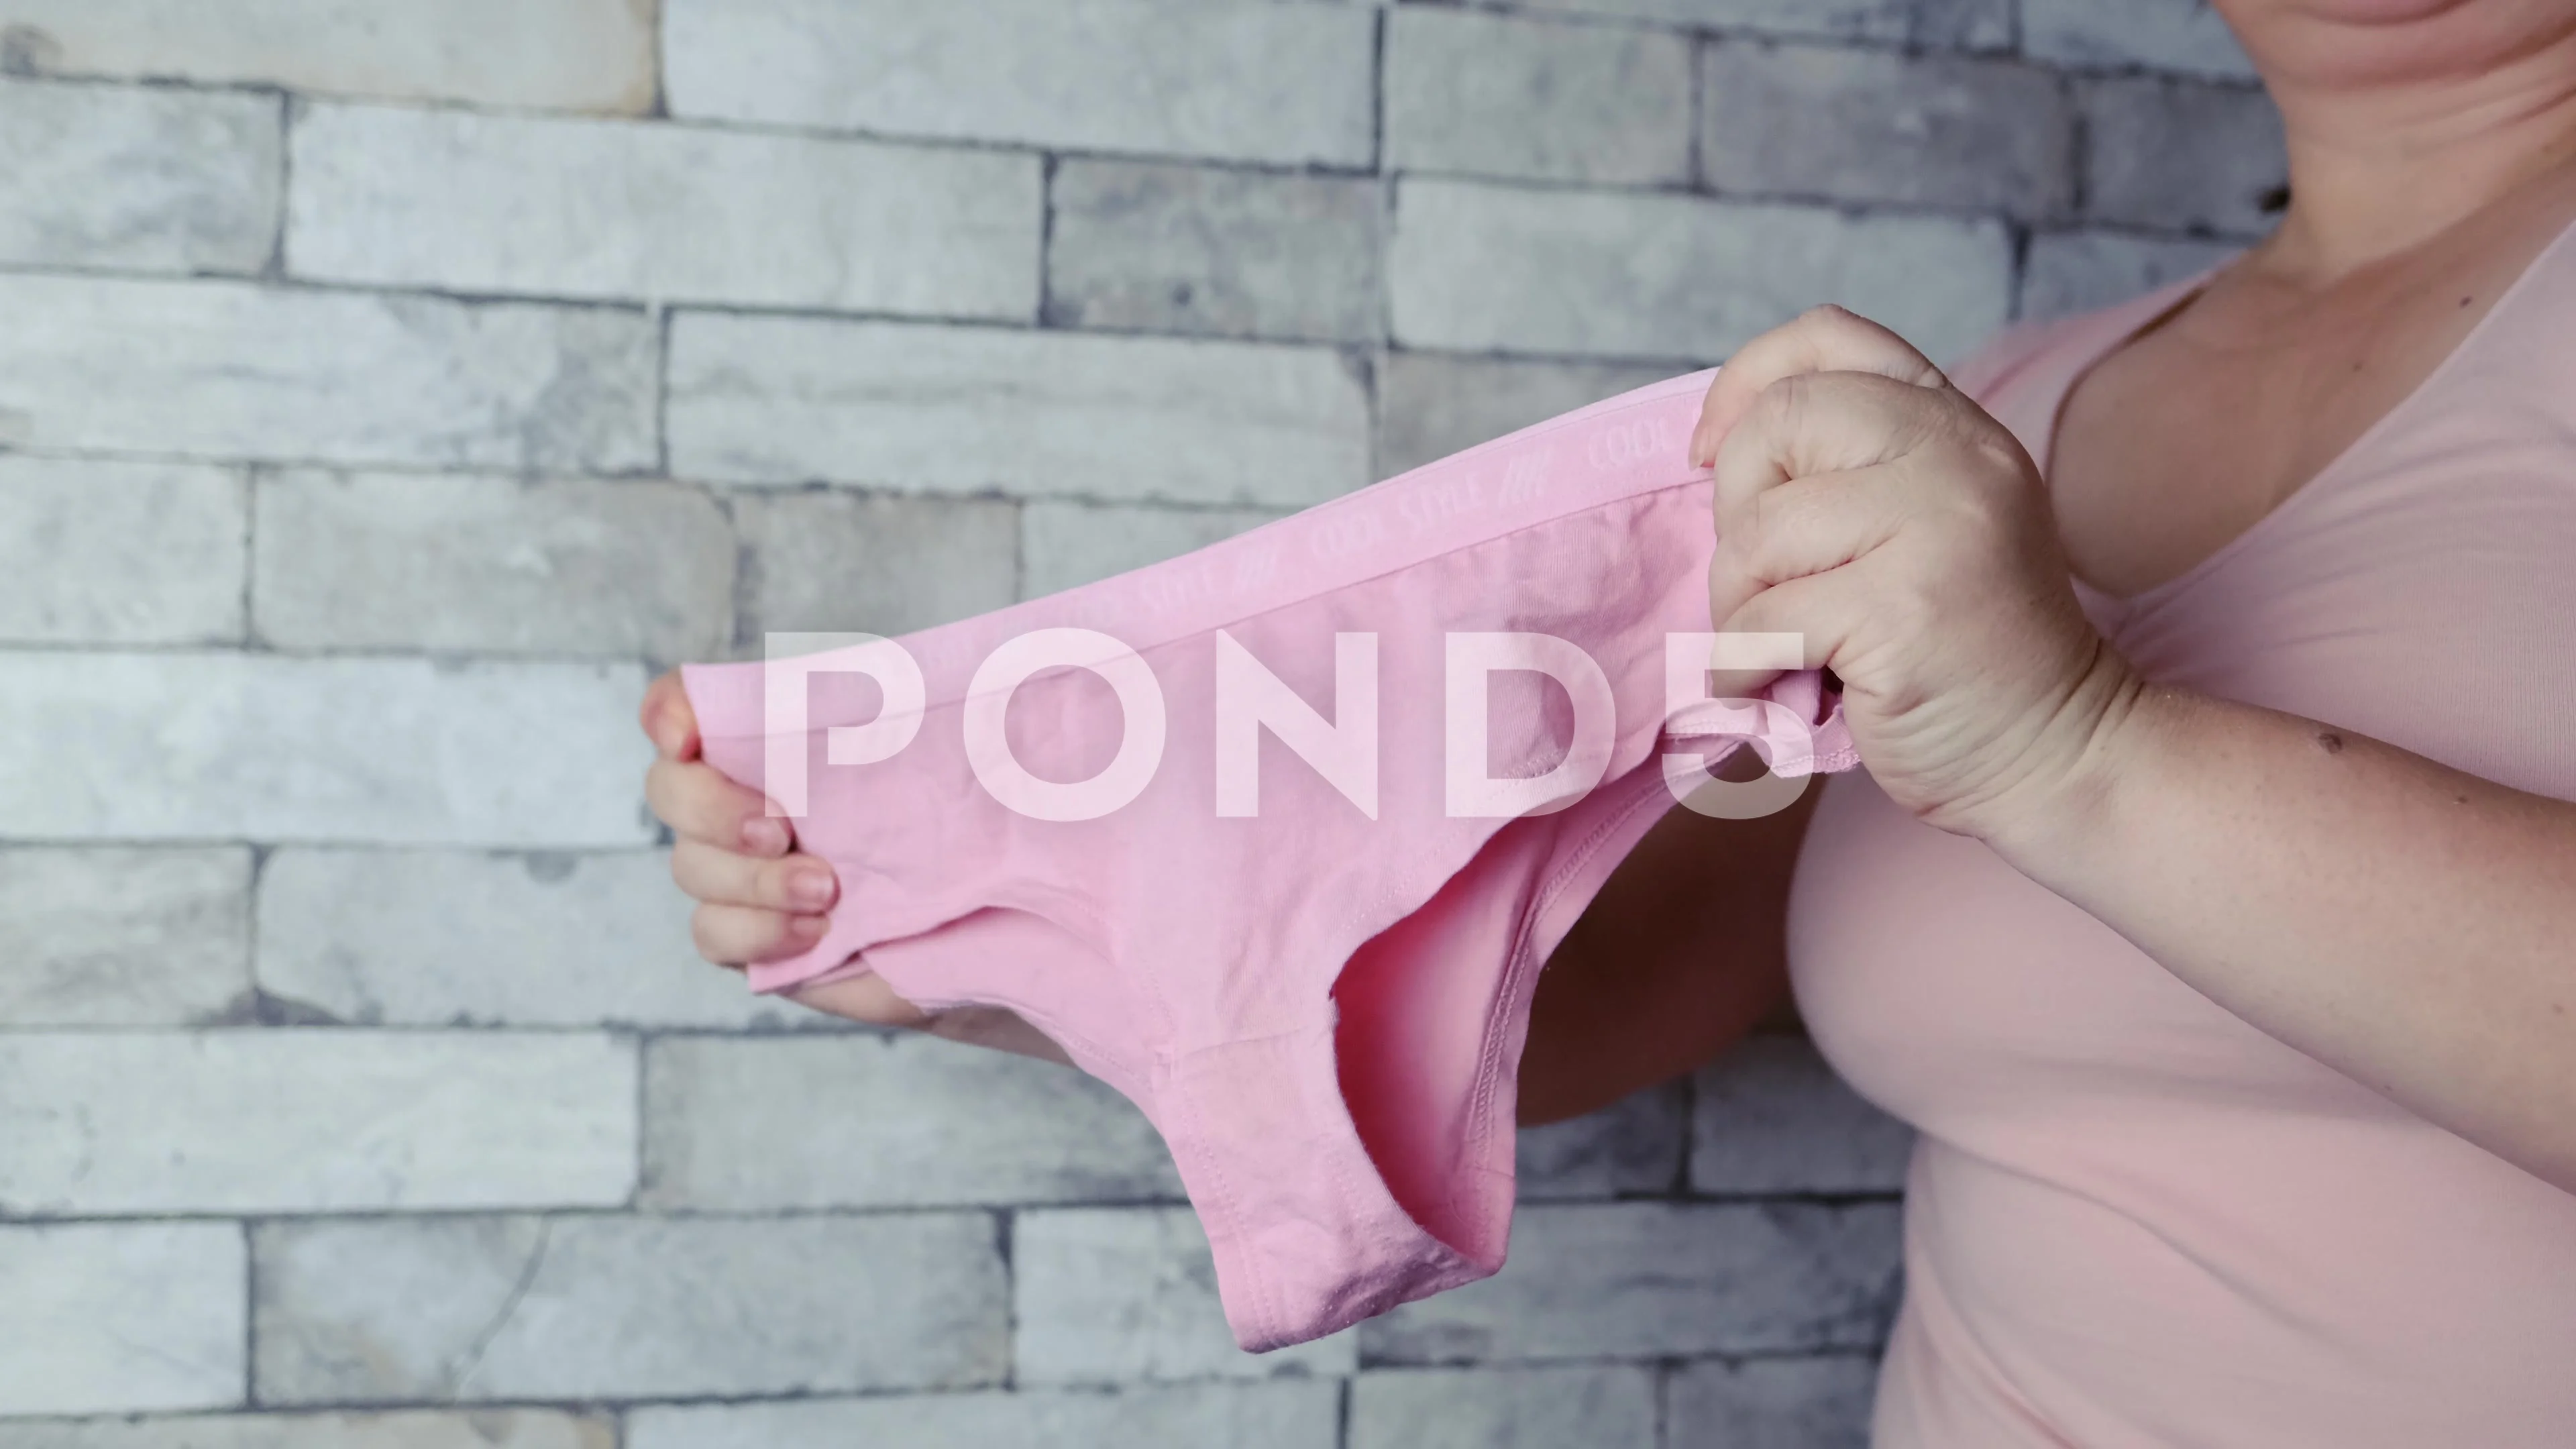 Doctor claims we've all been washing our underwear 'wrong' for